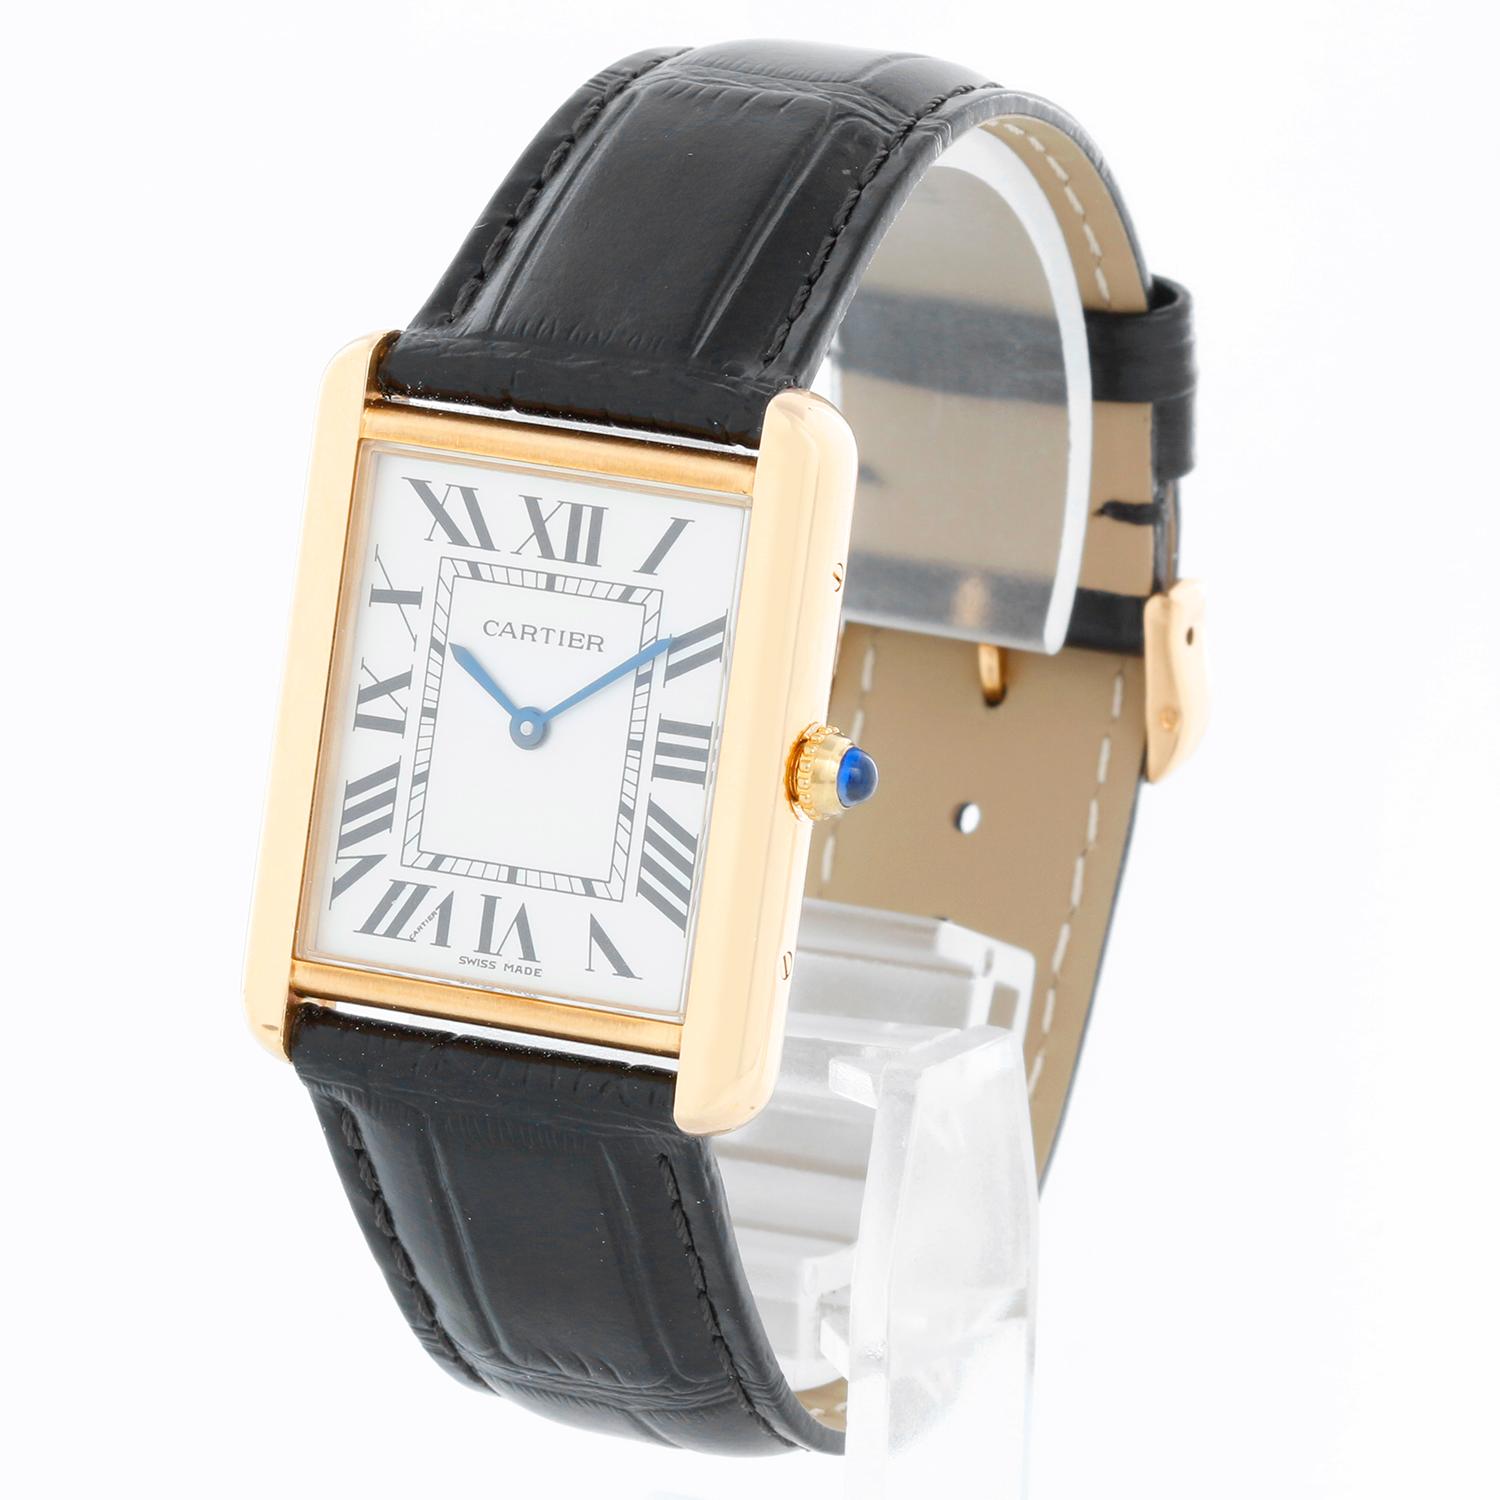 Cartier Tank Solo 18k Yellow Gold Men's Watch W1018855 - Quartz movement. 18k yellow gold case with stainless steel back (27mm x 34mm). White dial with black Roman numerals. Black Cartier strap band with 18k yellow gold Cartier buckle. Pre-owned